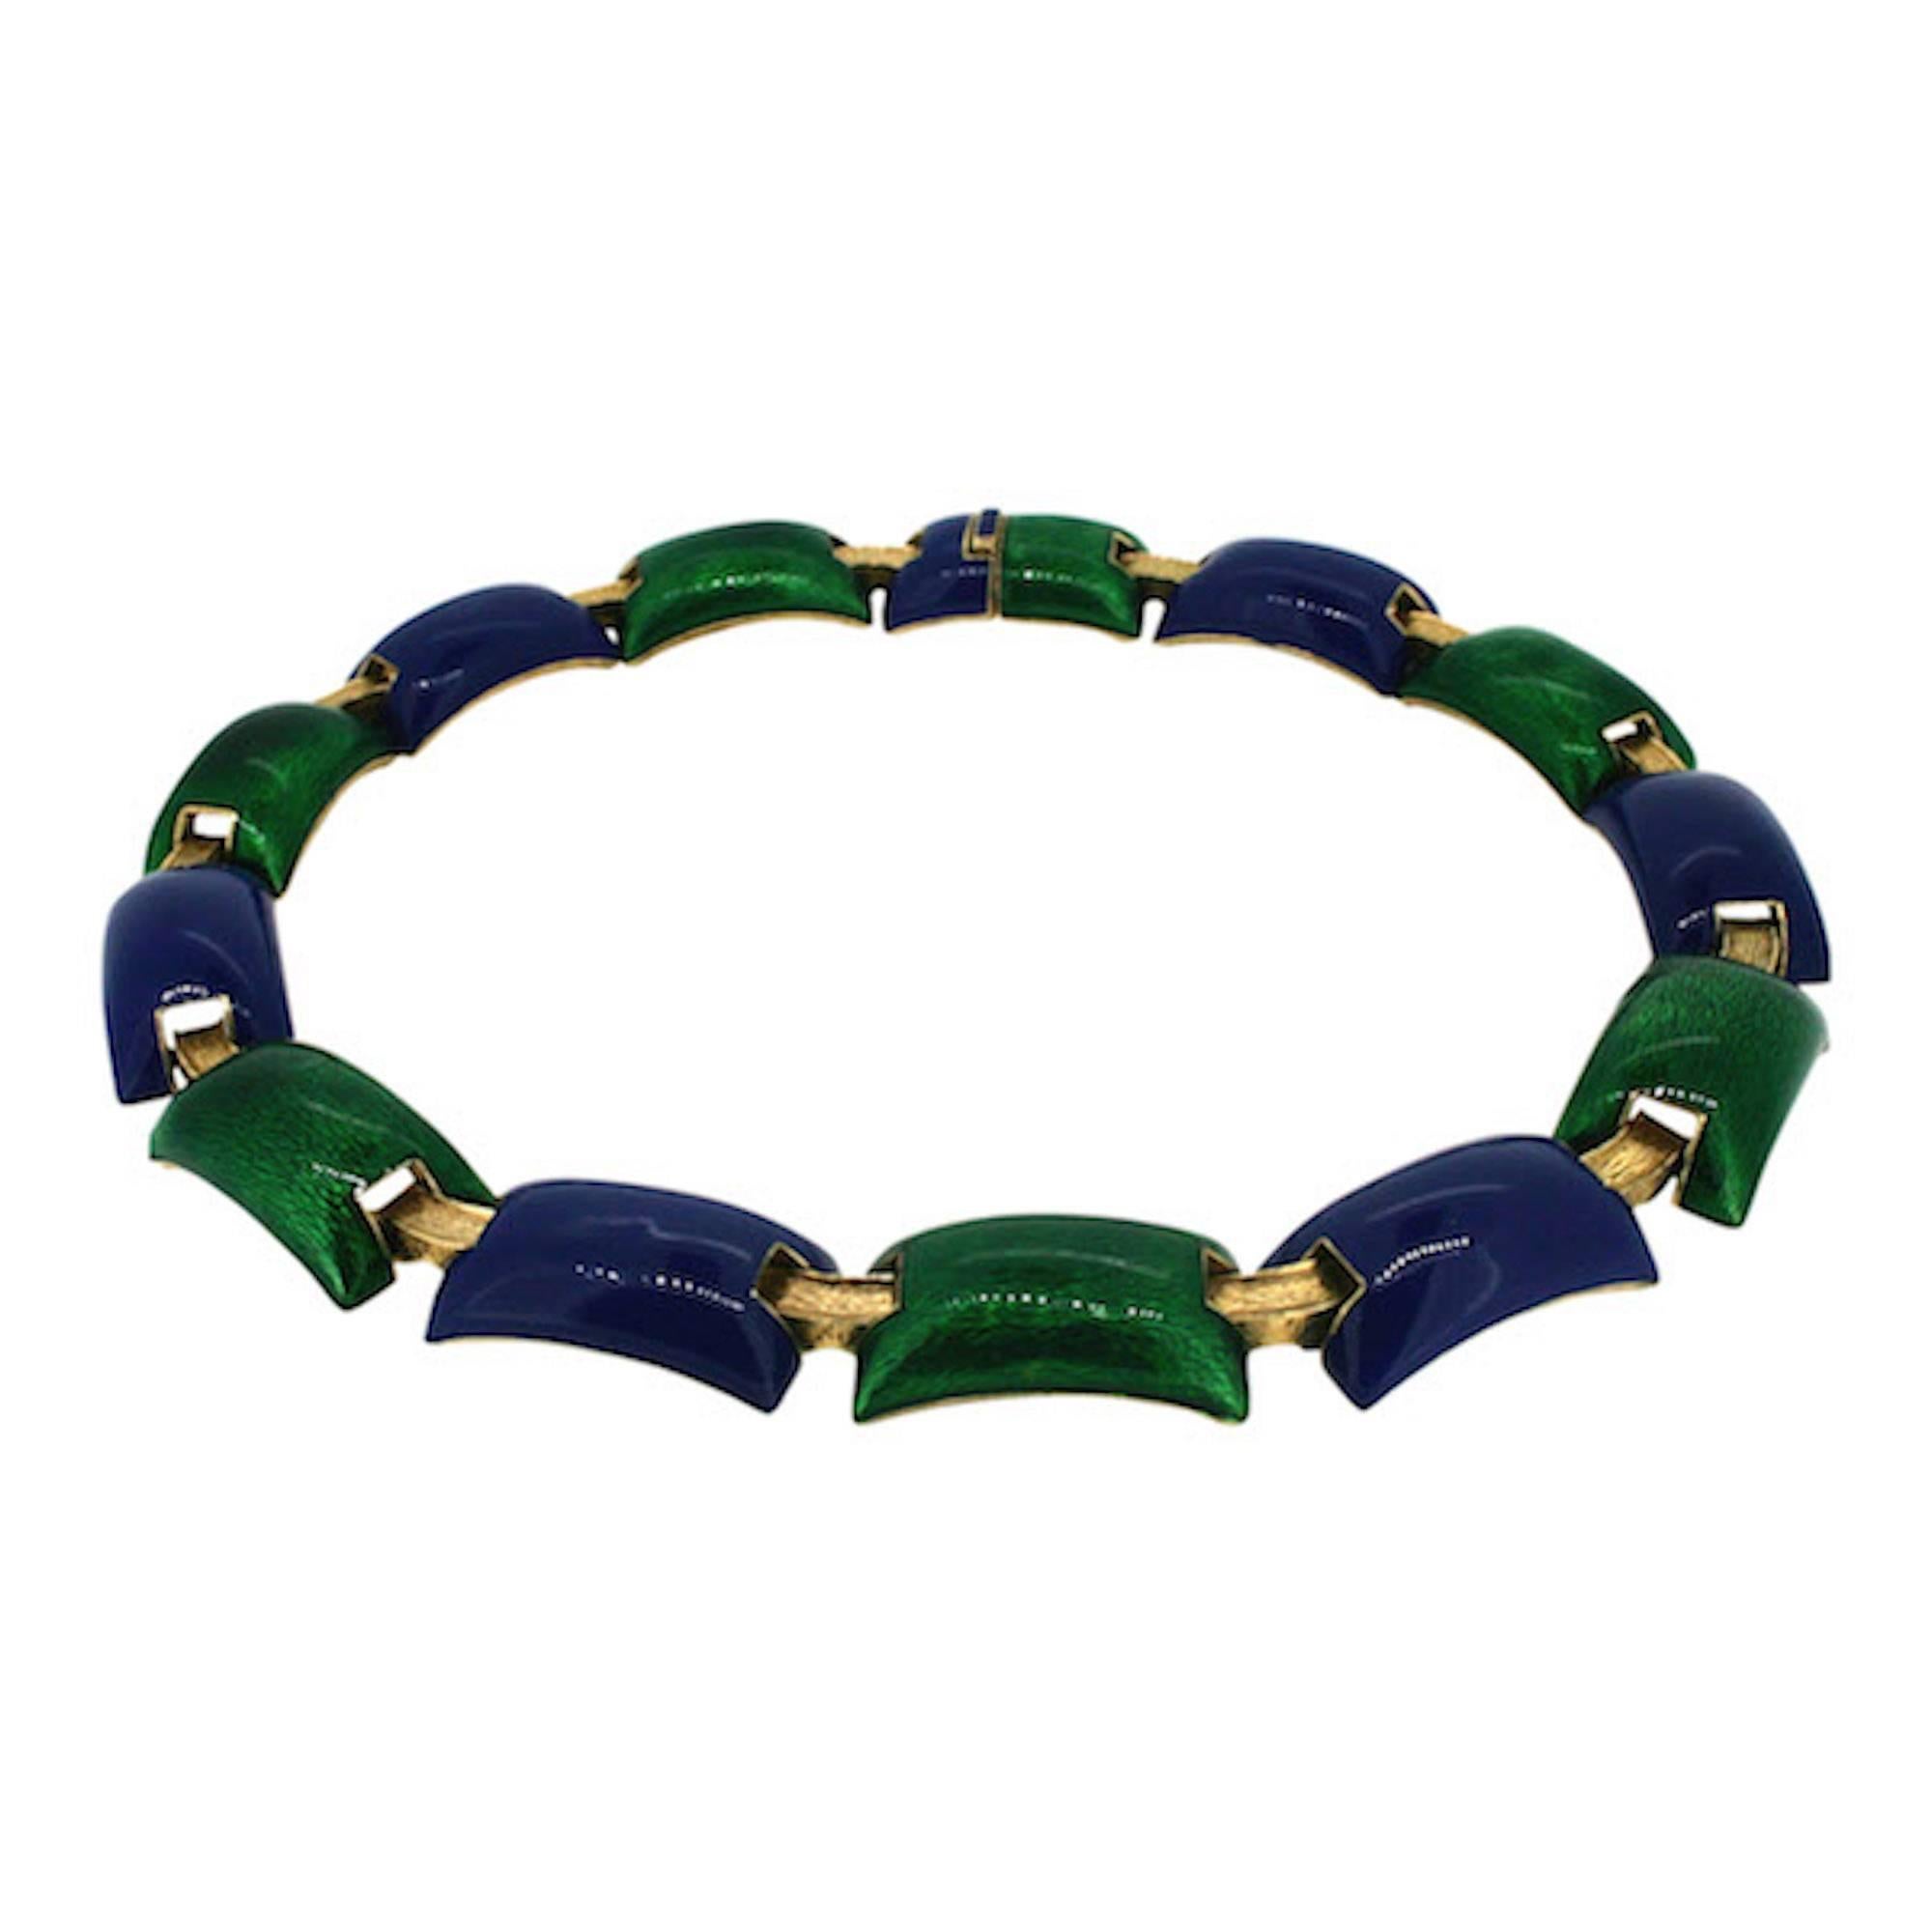 Featuring beautiful enamel work in jewel tones, this necklace dates from the 1970s and was made by Ciner.

Condition Report:
Good - The enamel work on one of the green panels must have been chipped off and reglued at some point in this necklaces'